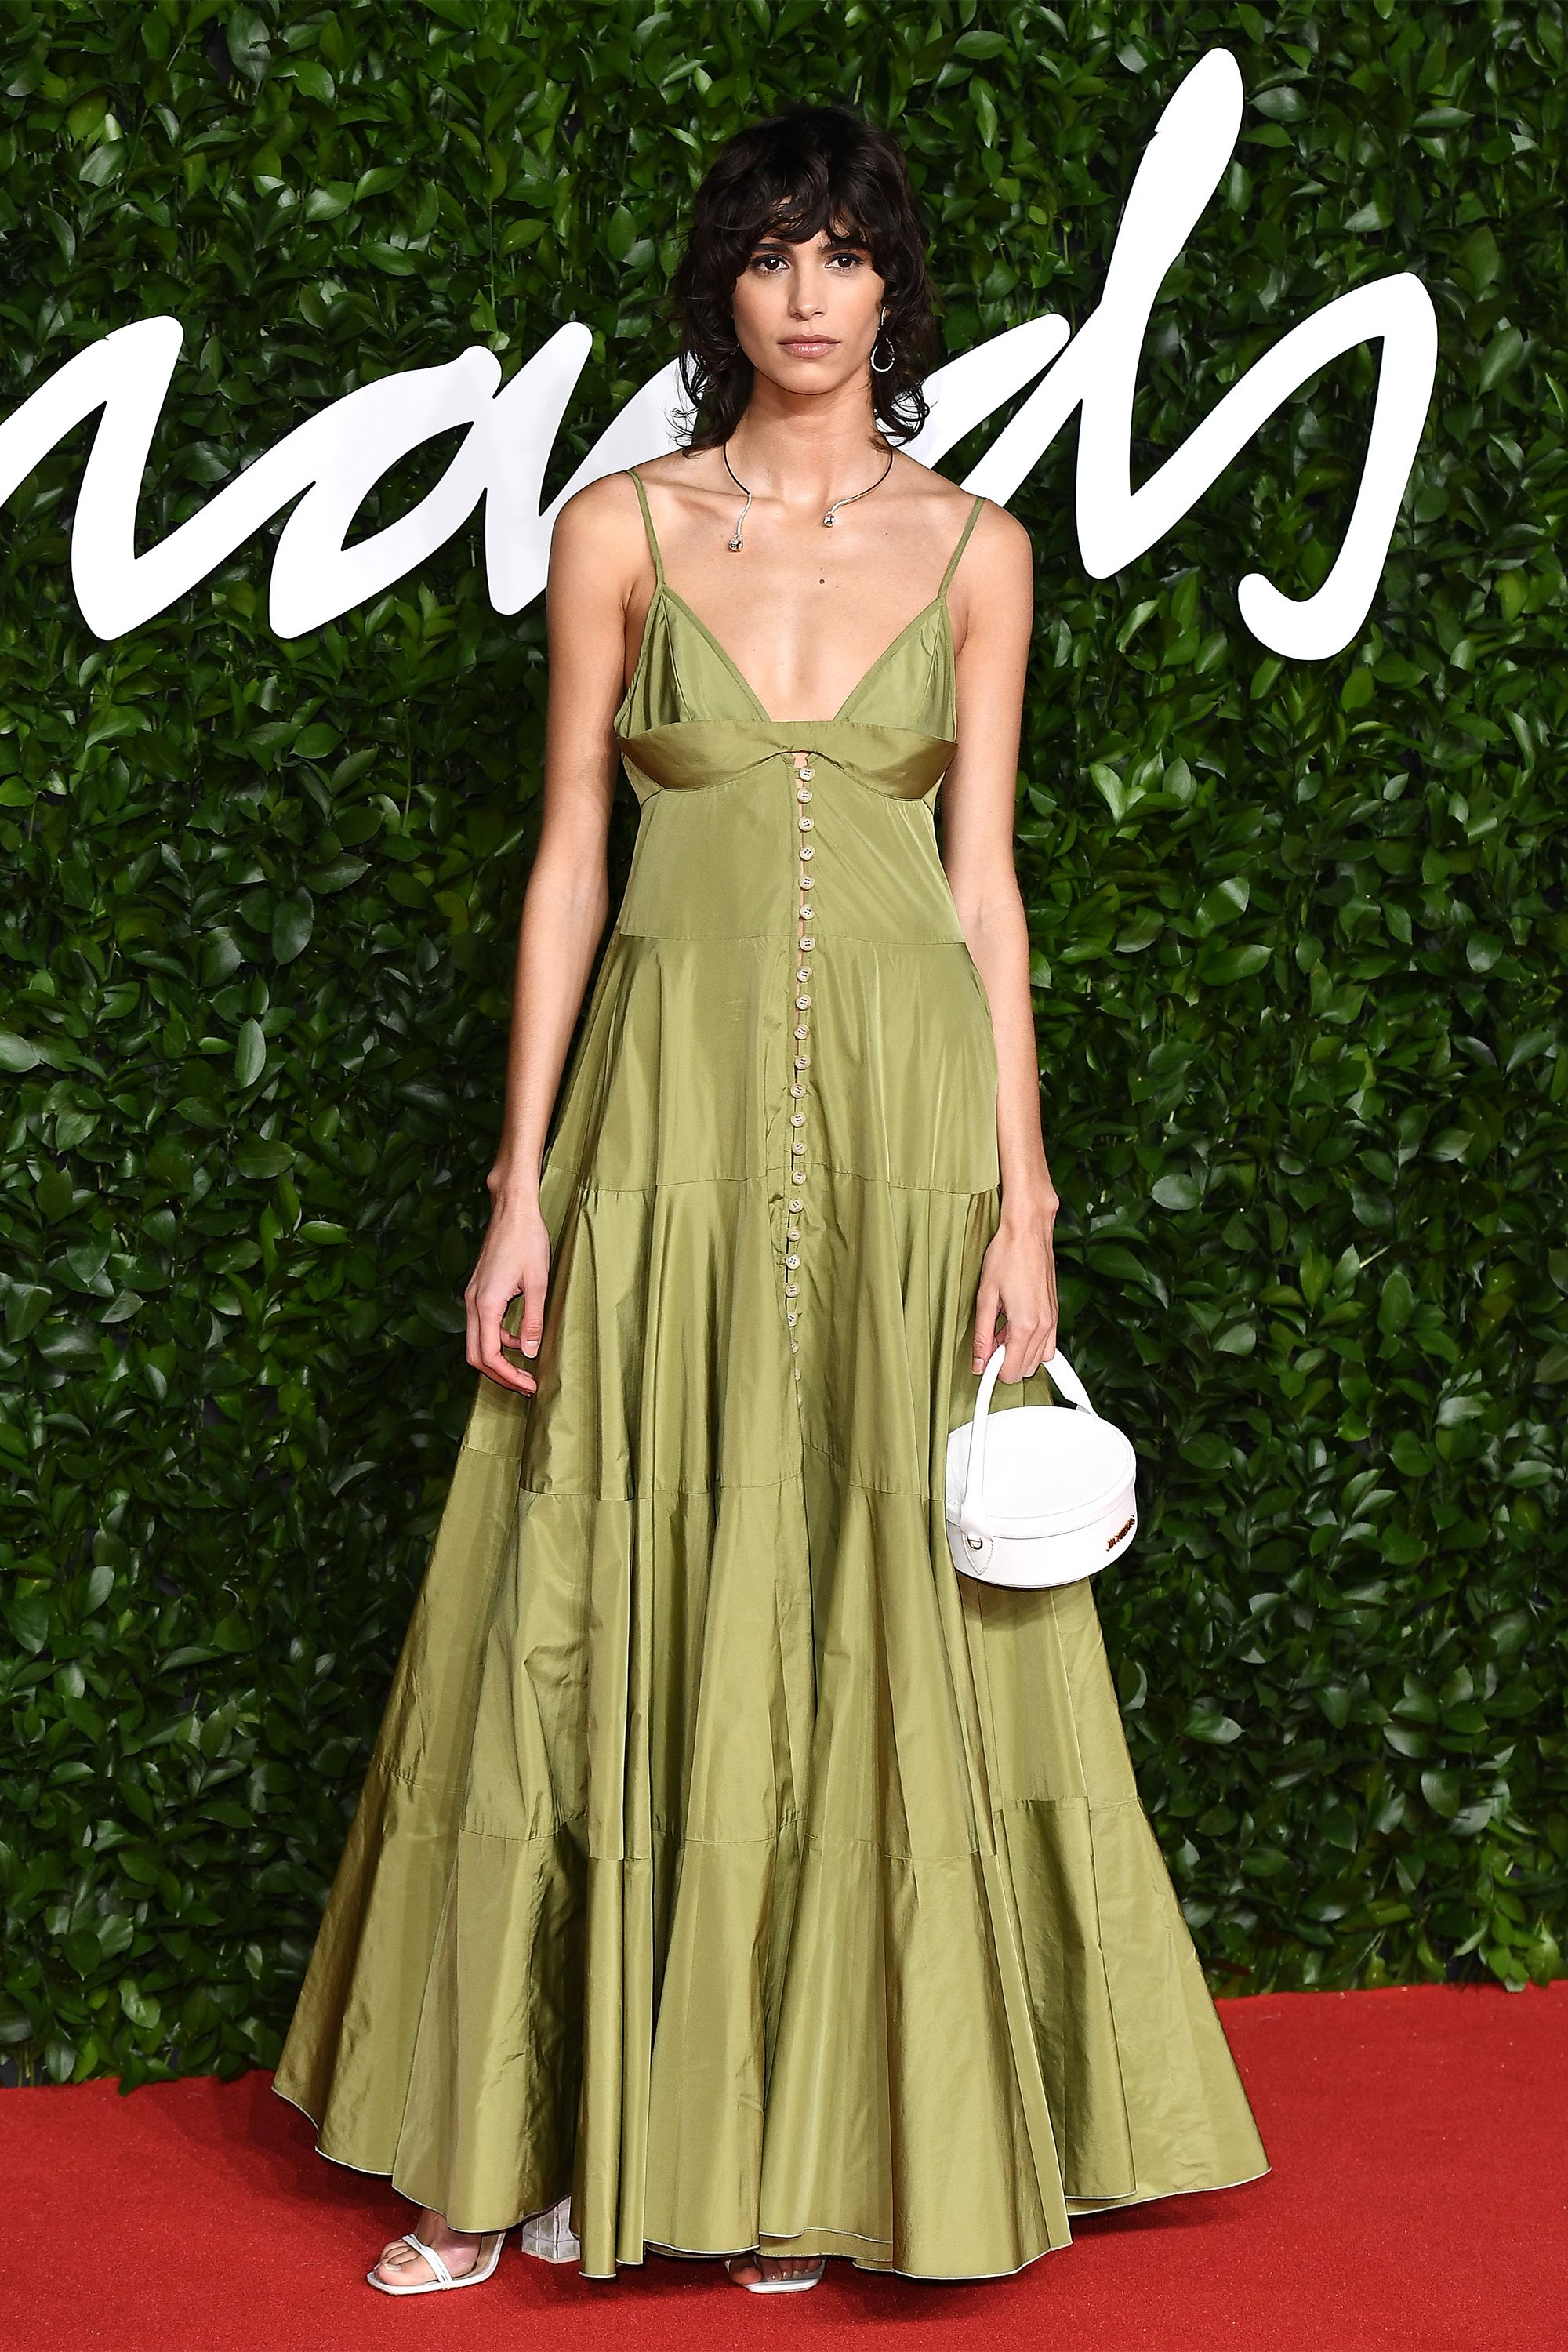 Fashion Awards 2019 - Best Red Carpet Looks